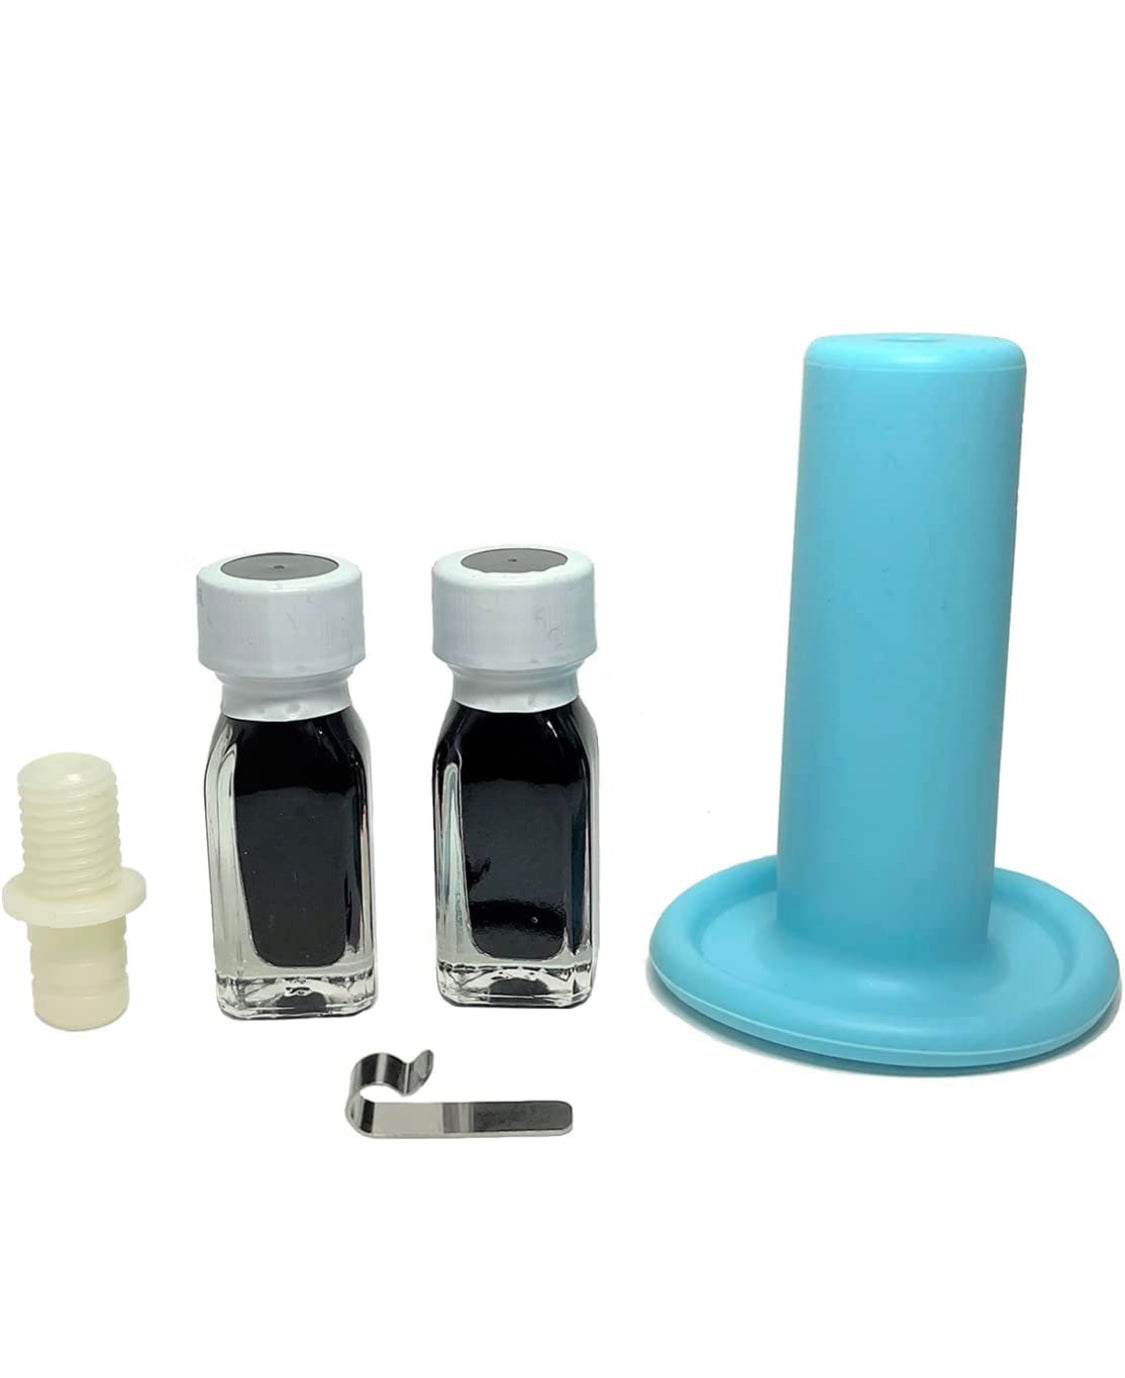 Berkey - Filter Priming Kit For Use with Berkey Gravity-Fed Water Filtration Systems